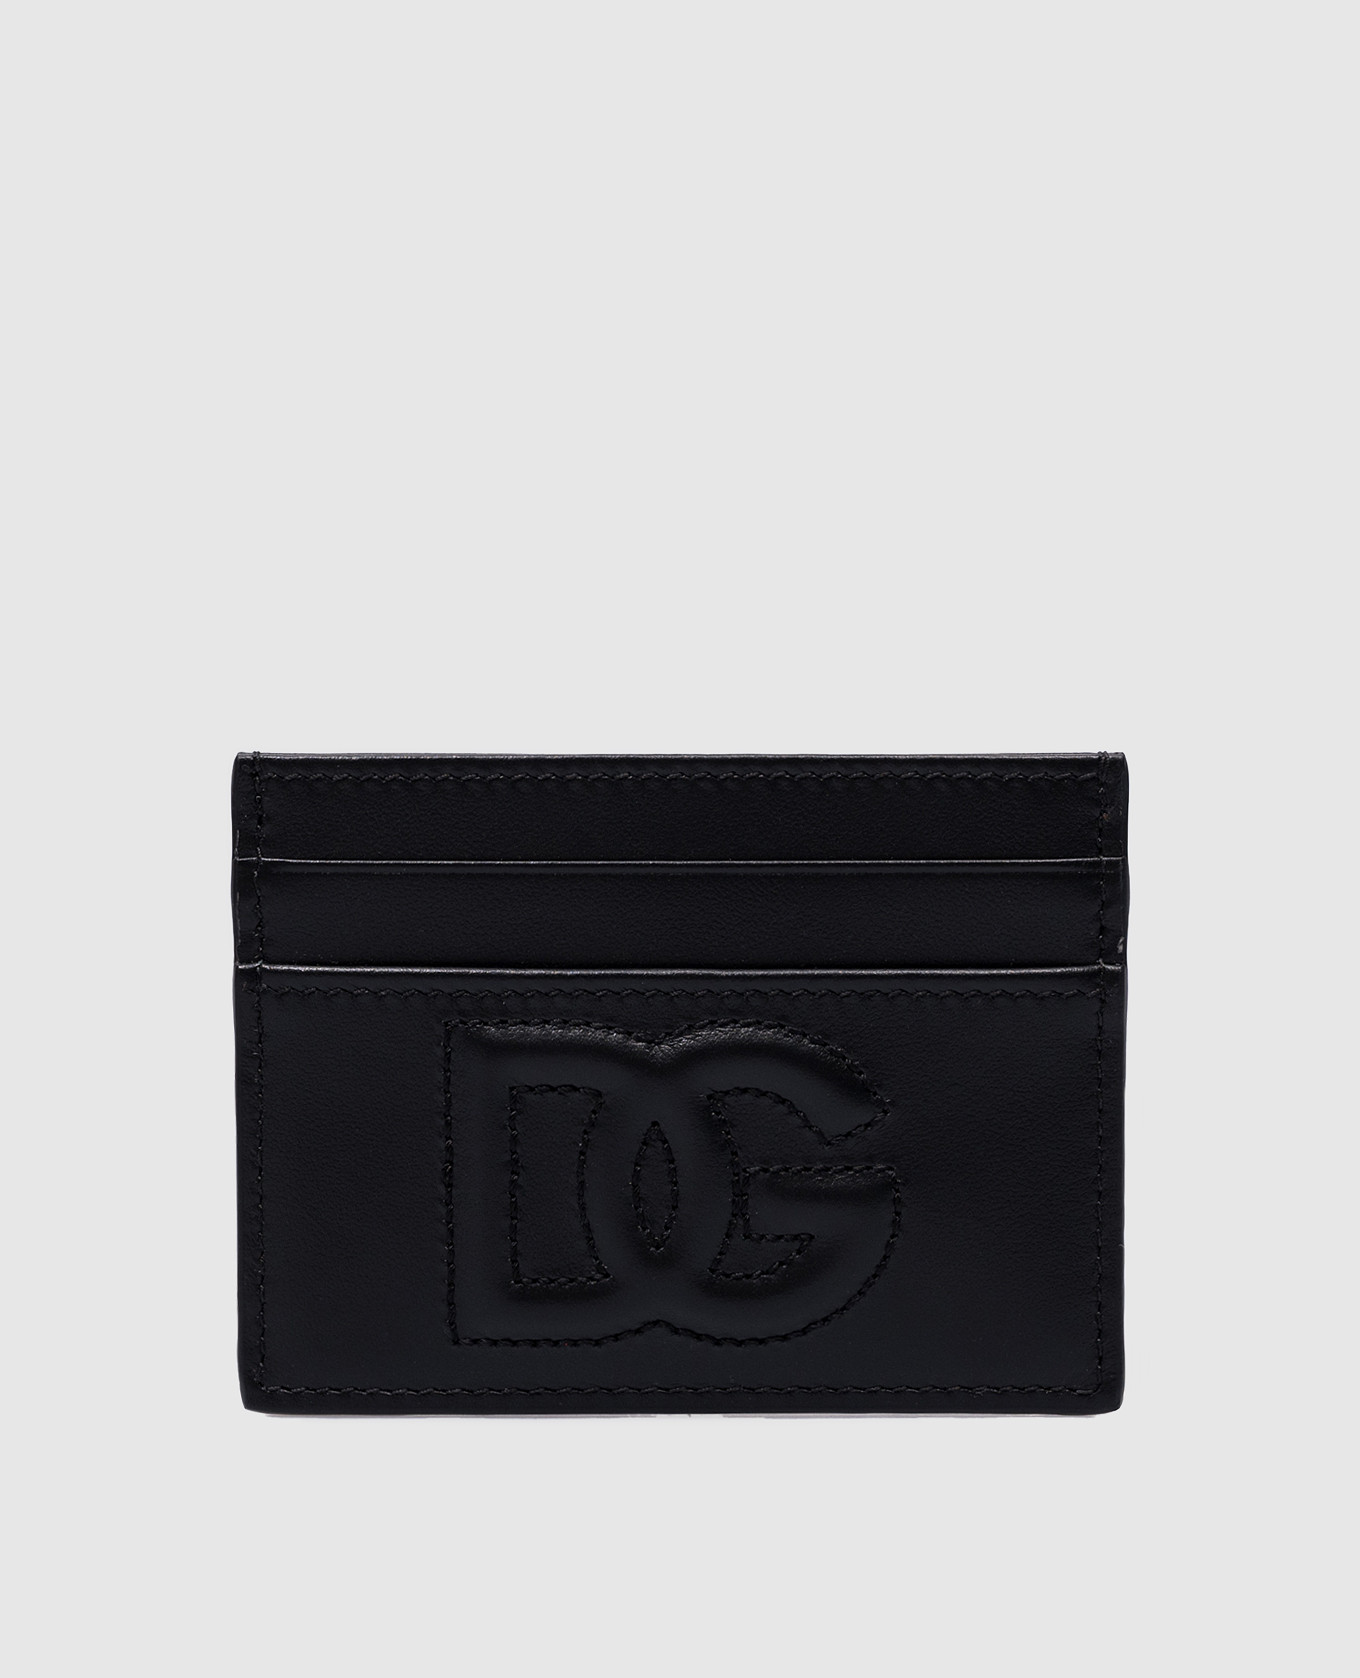 Black leather card holder with textured DG logo